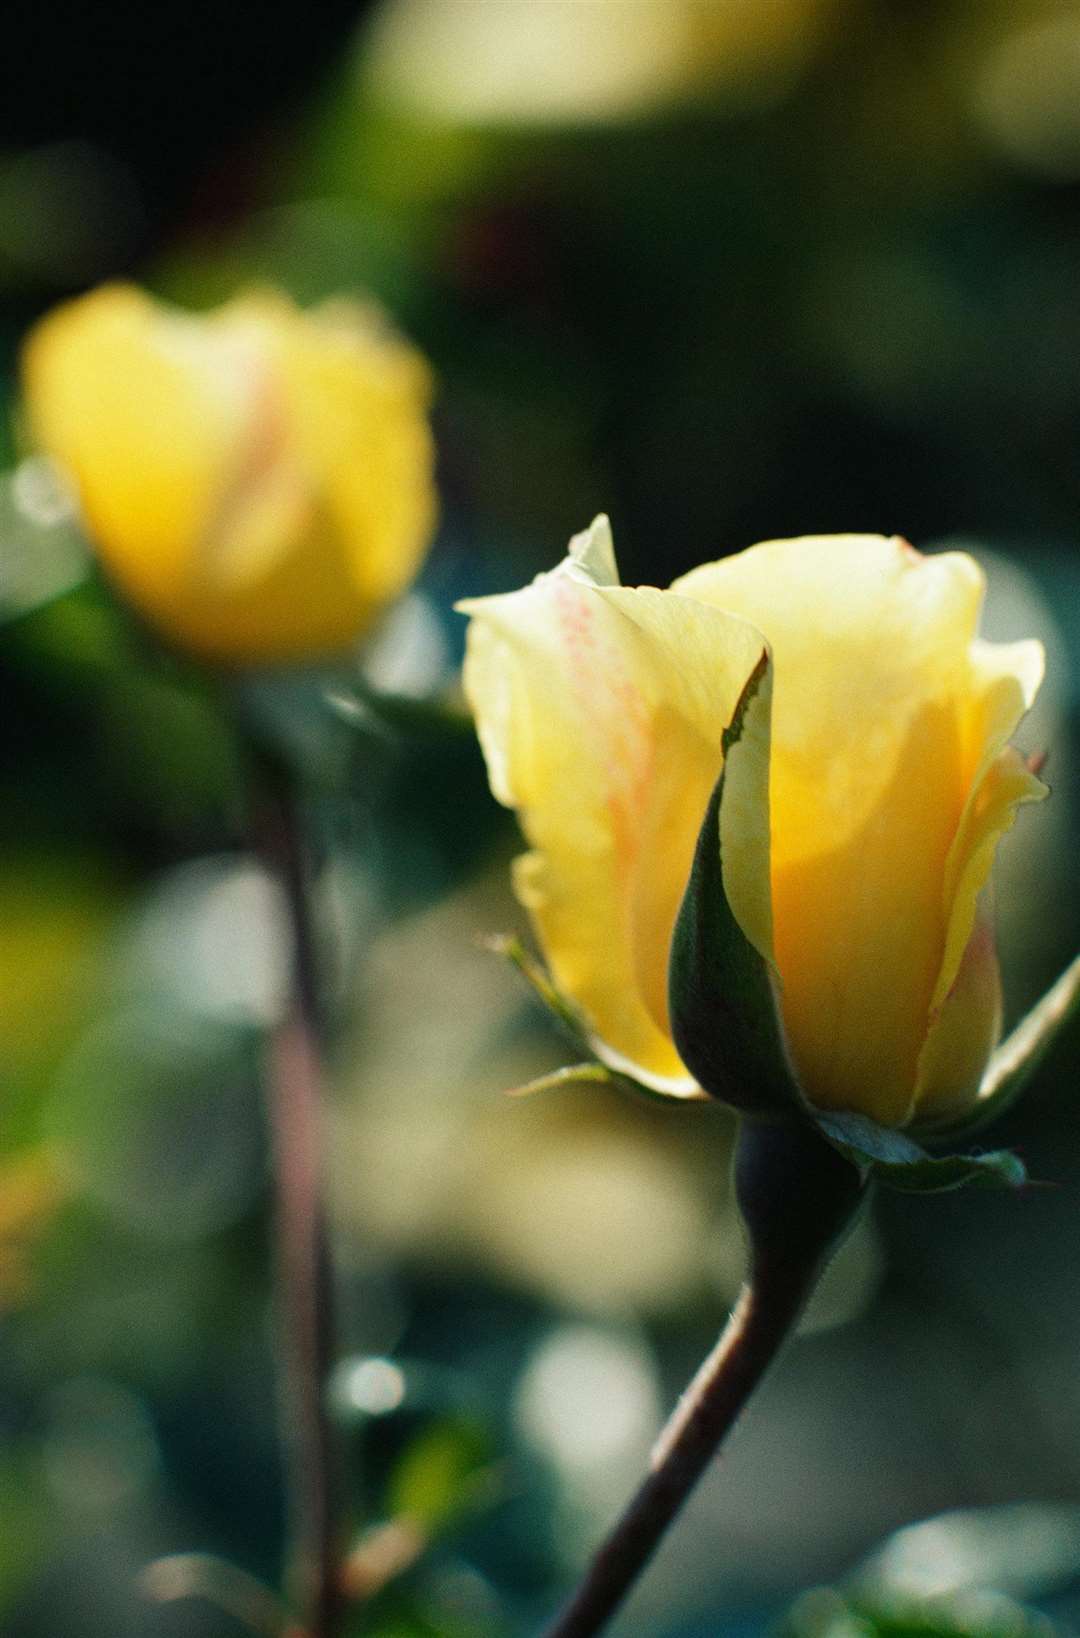 A yellow rose: which is your favourite?